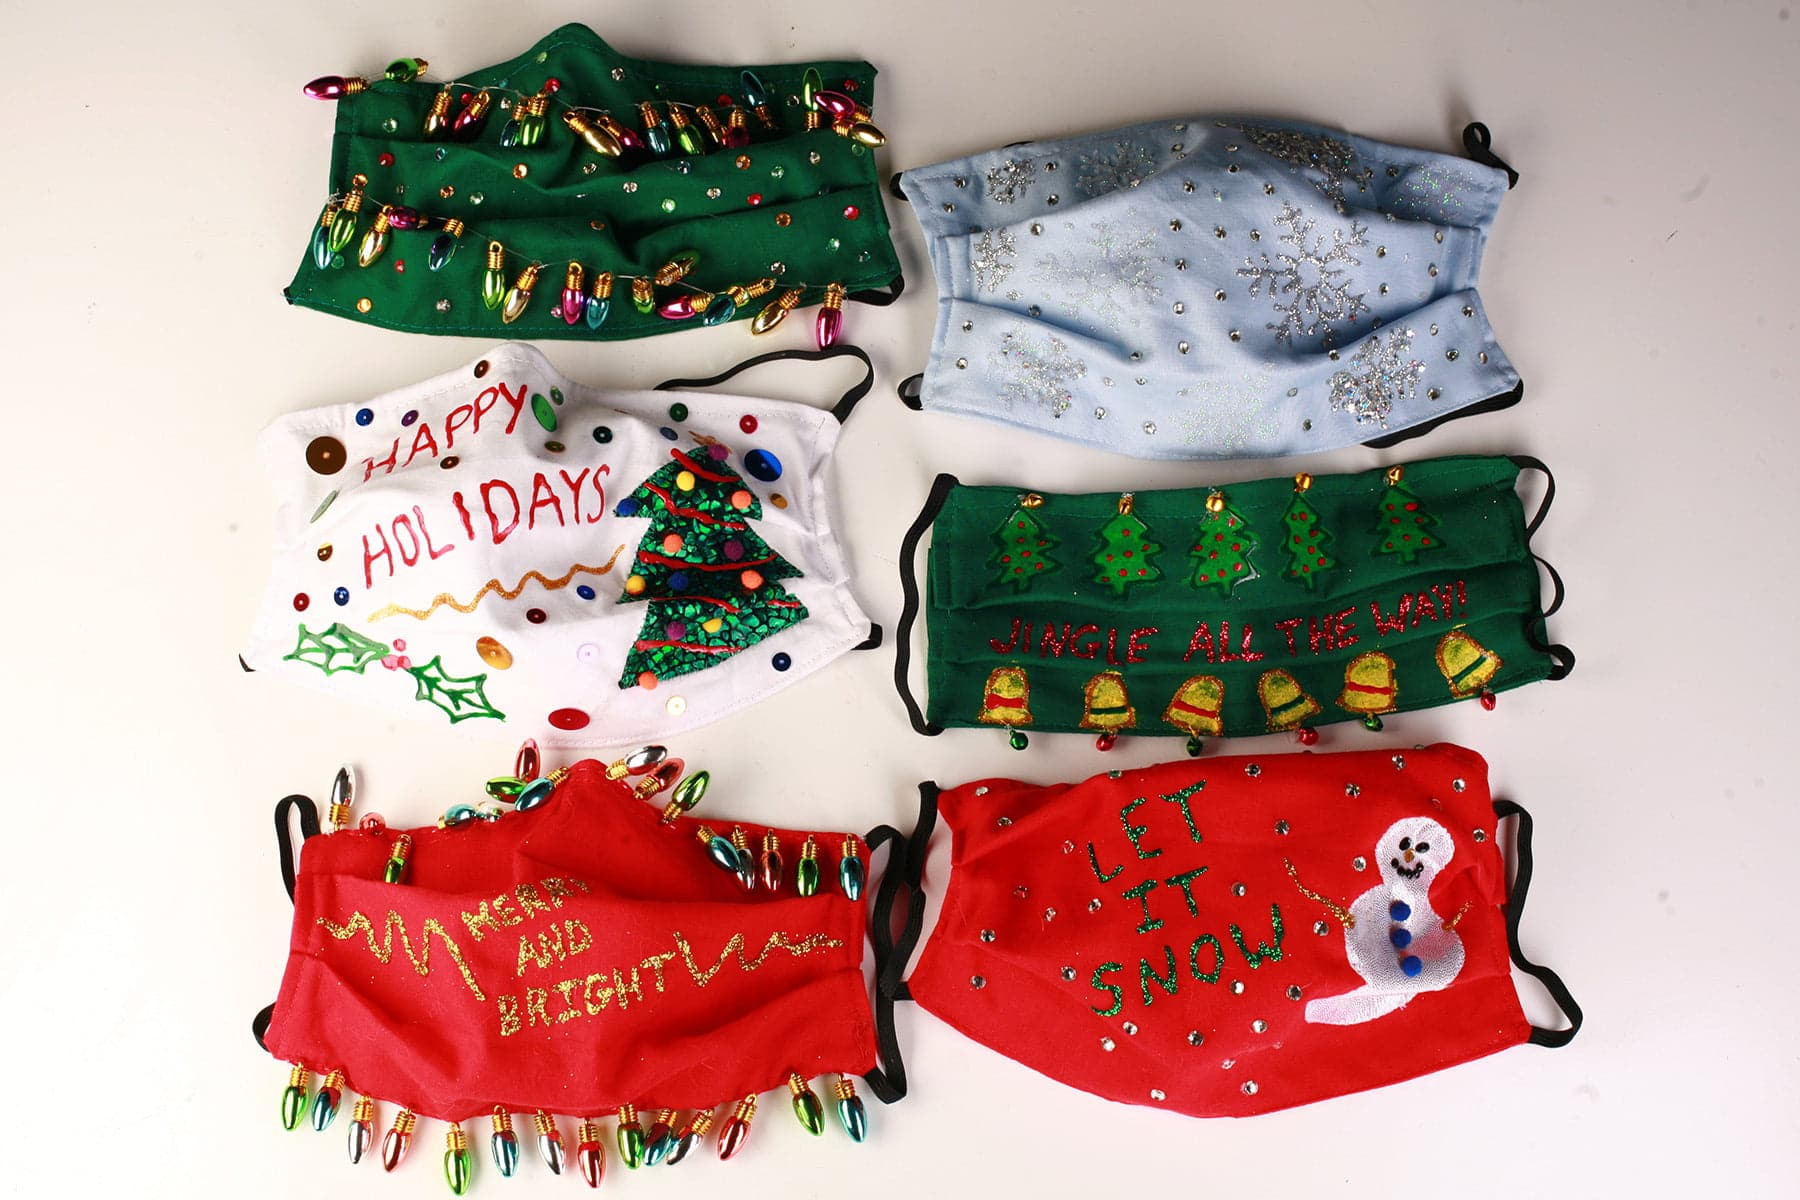 An array of 6 gaudily decorated "Ugly Christmas Sweater" style face masks, on a white background.